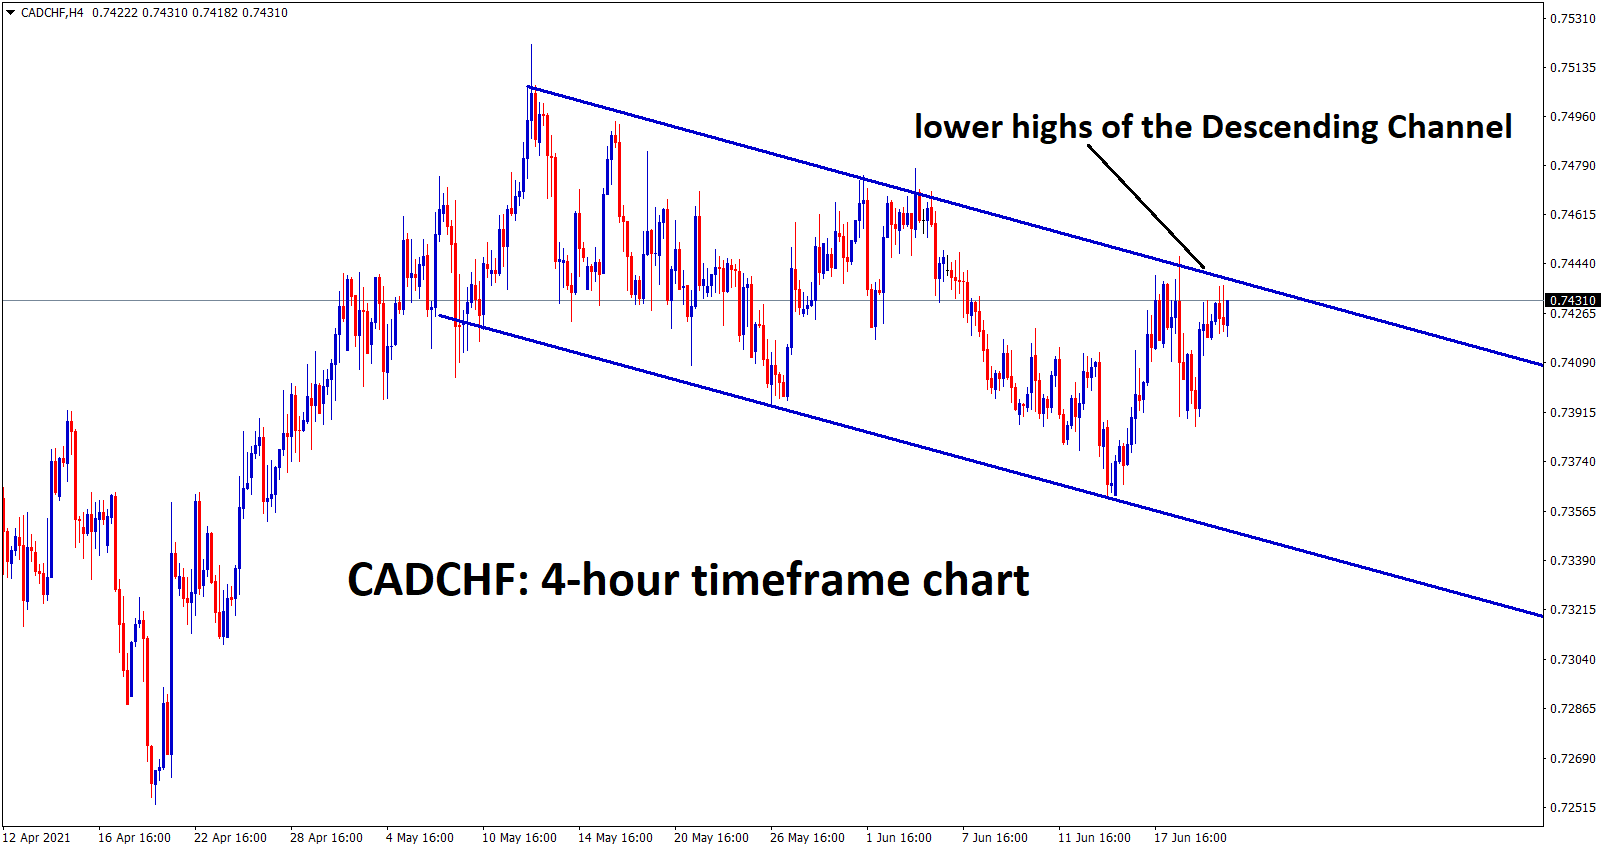 CADCHF is moving in a descending channel